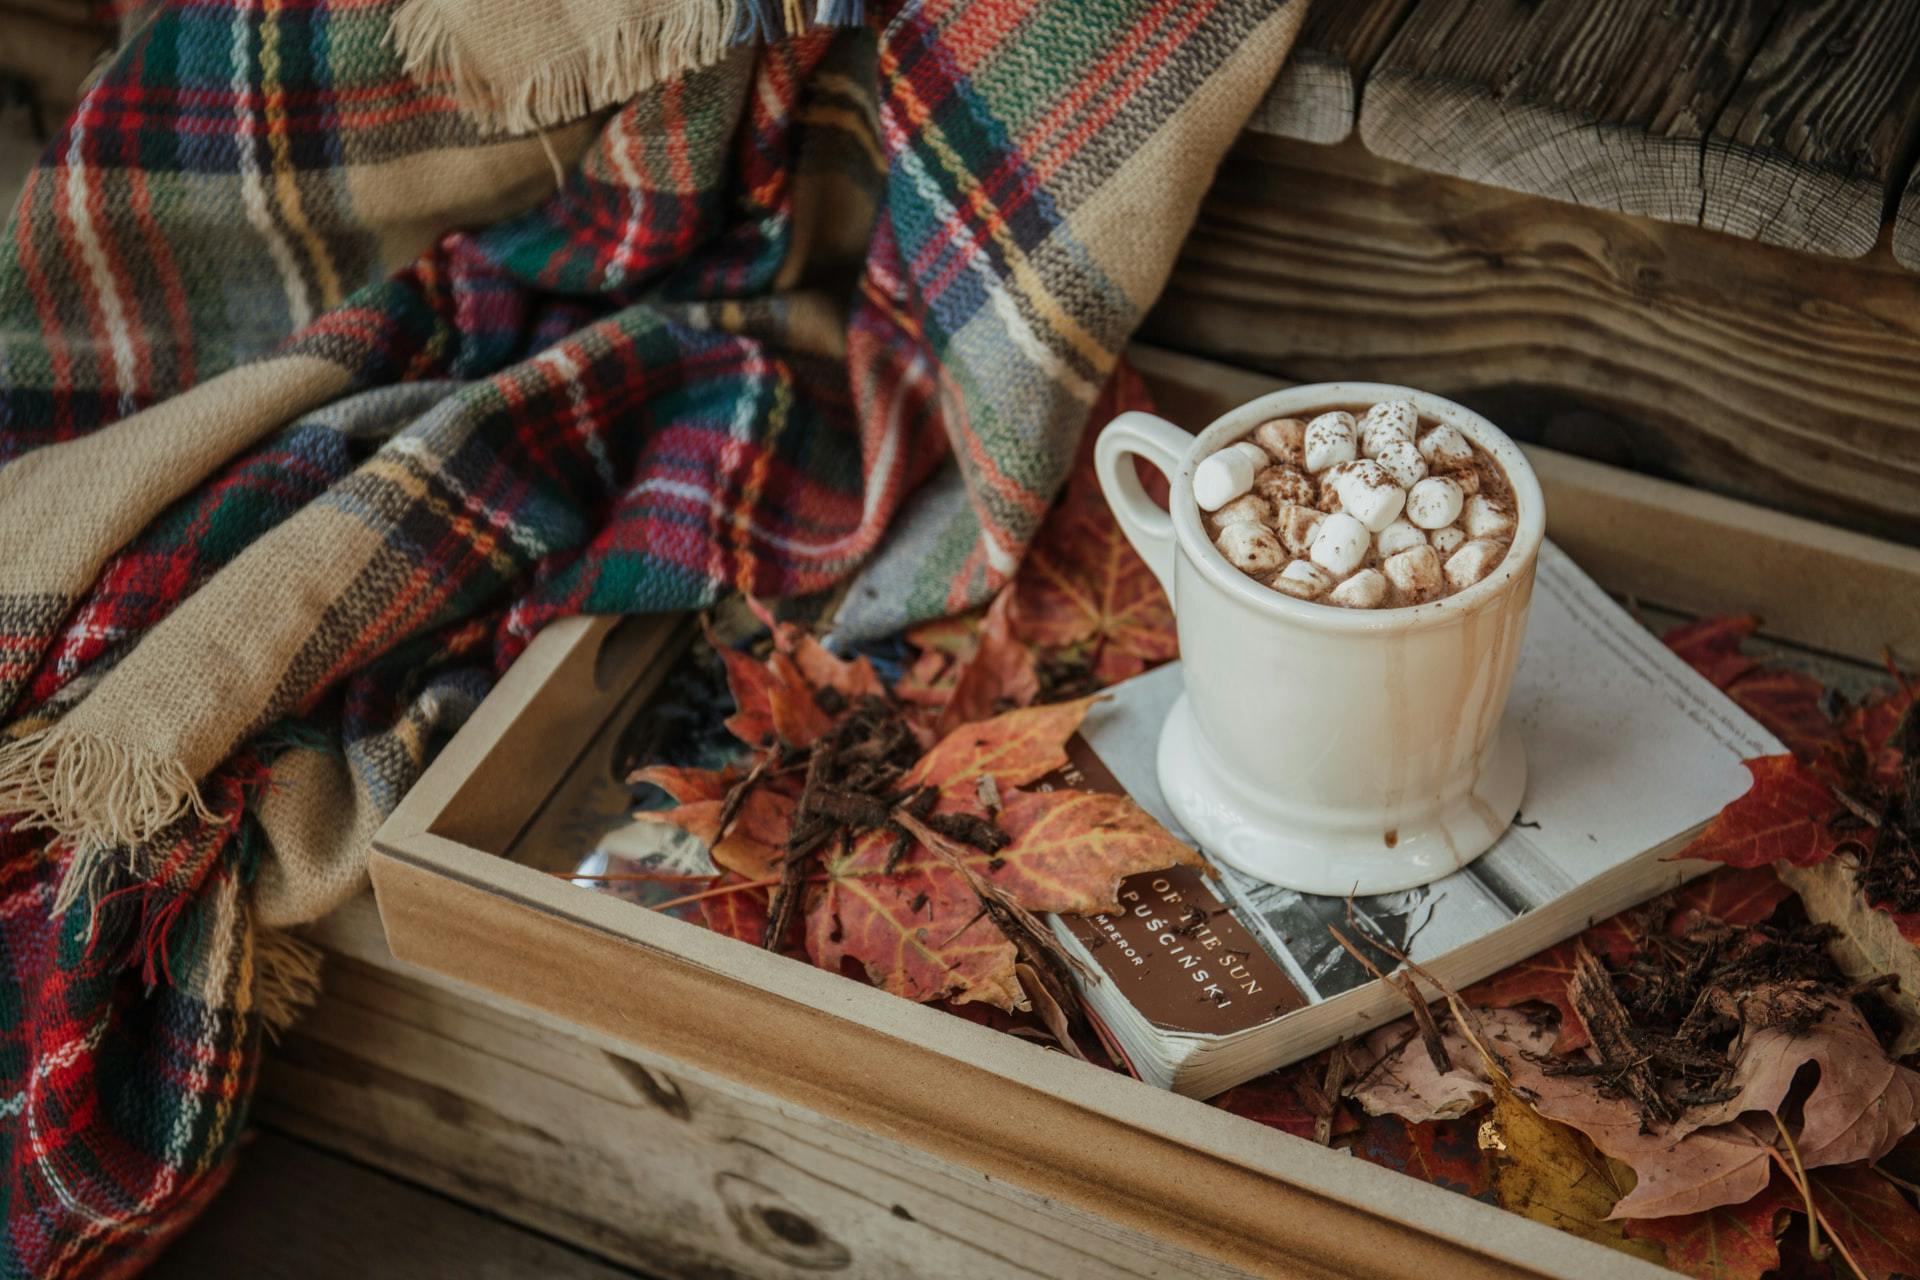 A blanket with a cup of hot chocolate and marshmellows. The cup is sitting on top of a book and there are leaves around.